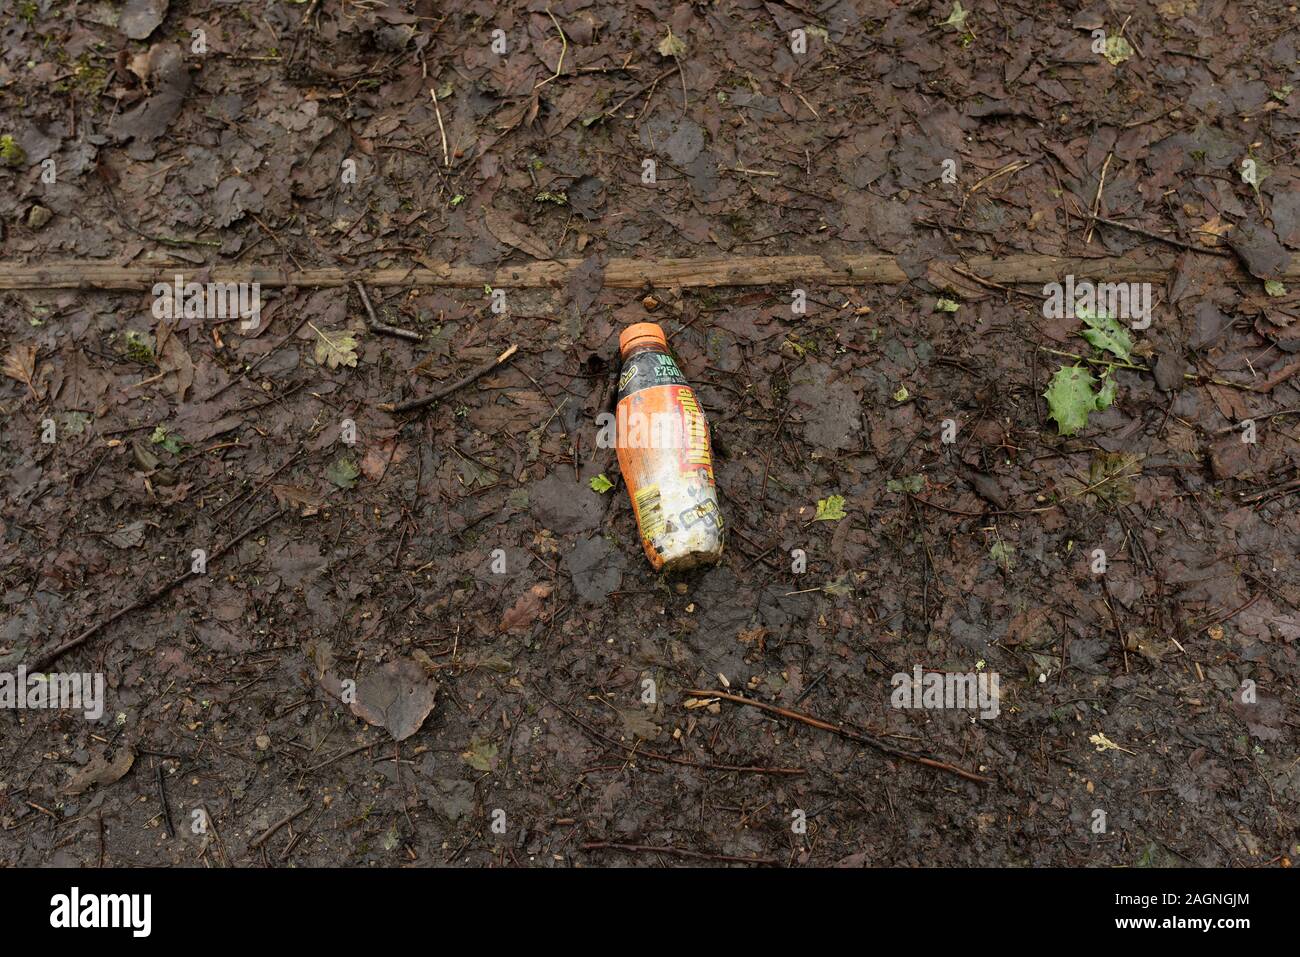 Plastic bottle thrown away on rotting leaves in countryside in burrs country park in bury lancashire uk Stock Photo